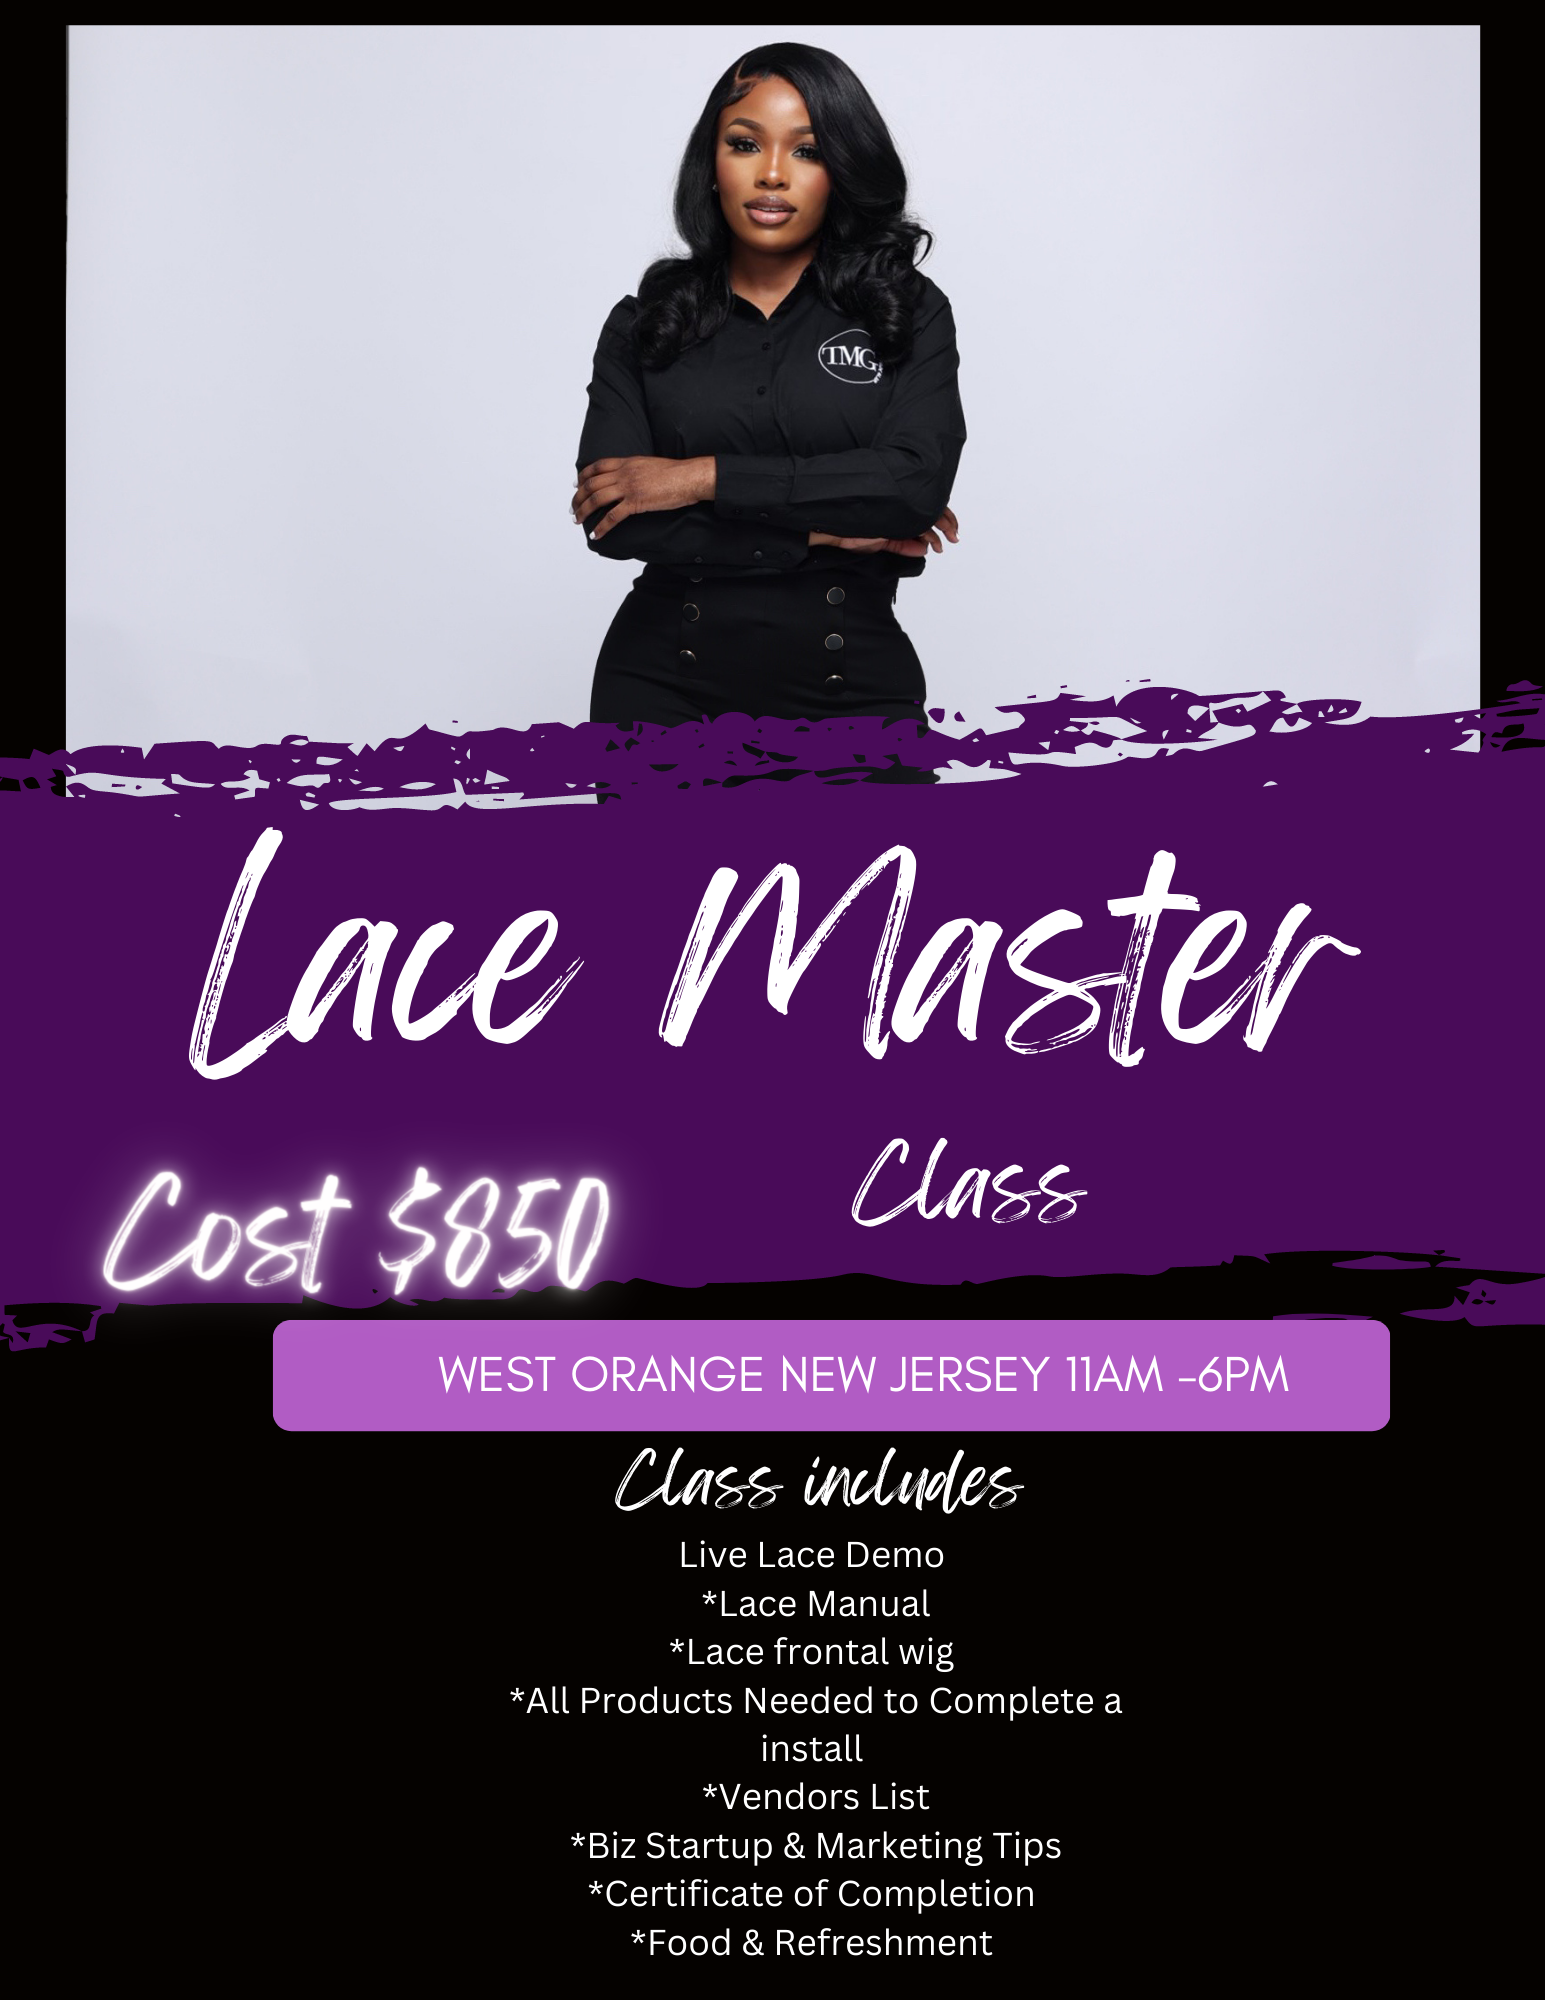 Behind the Scenes Lace Master Class (Look and Learn)